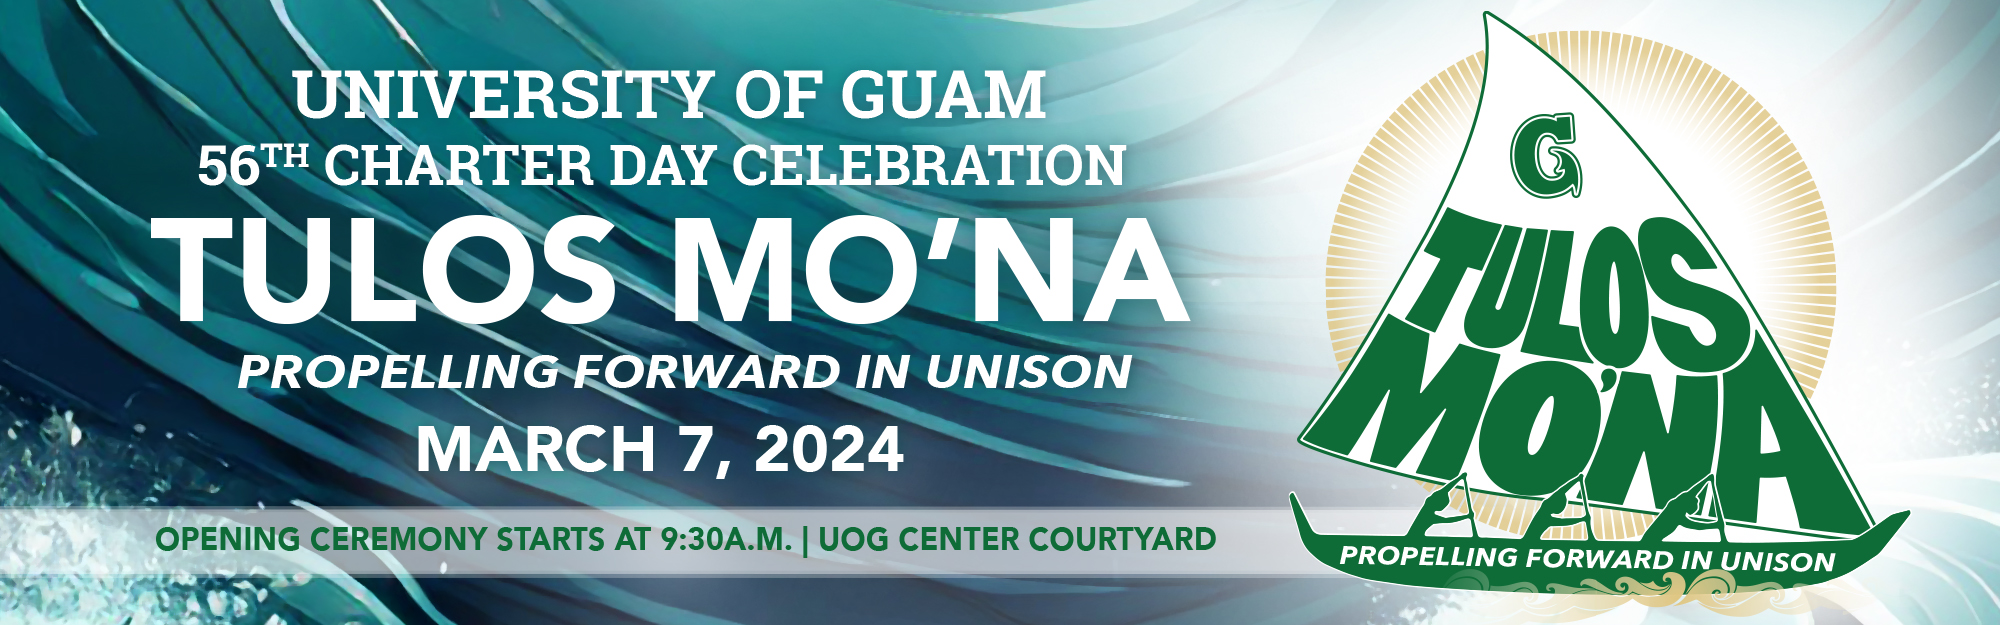 Tulos Mo'Na - Propelling Forward in Unison! Opening ceremony starts at 9AM, March 7, 2024, at the UOG Center Courtyard